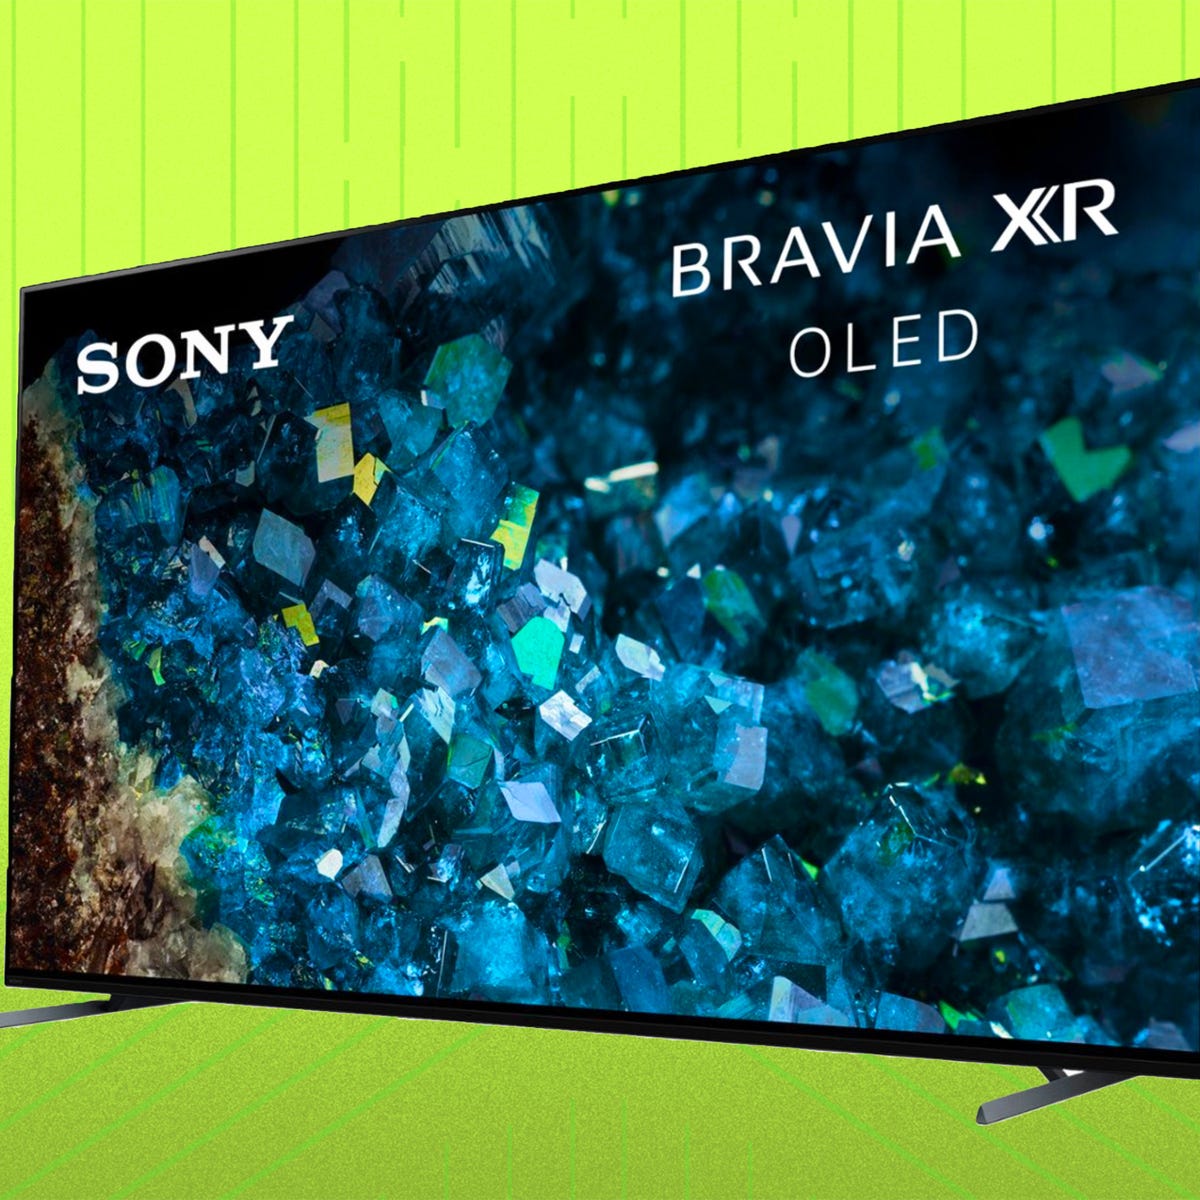 The Sony A80L OLED TV's AI-powered upscaling blew me away, and it's $600  off on Labor Day